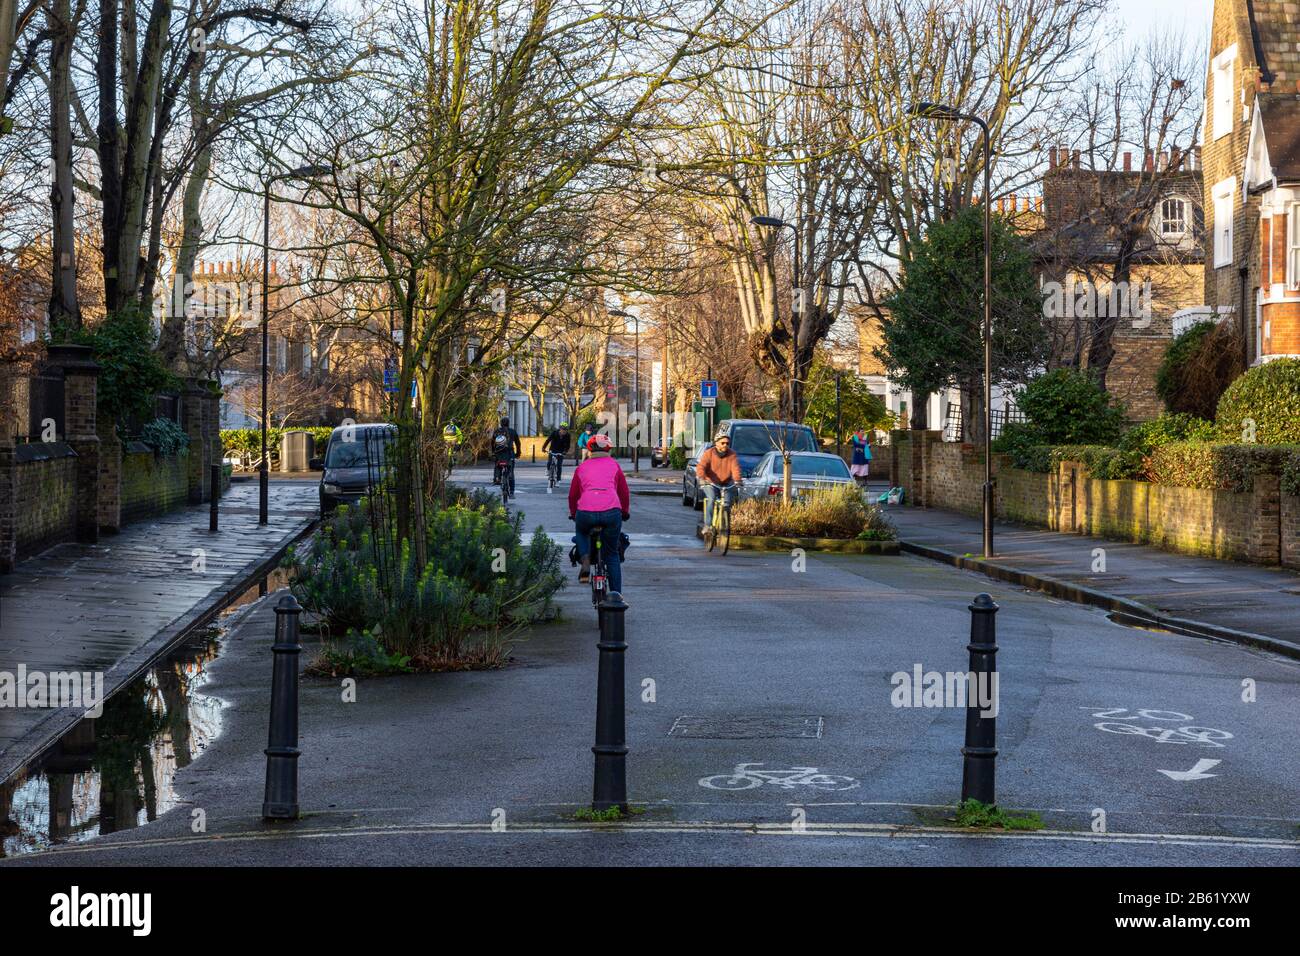 London, England, UK - January 17, 2020: Cyclists ride along residential streets that make up the Quietway 2 cycleway route in Hackney, past bollards t Stock Photo